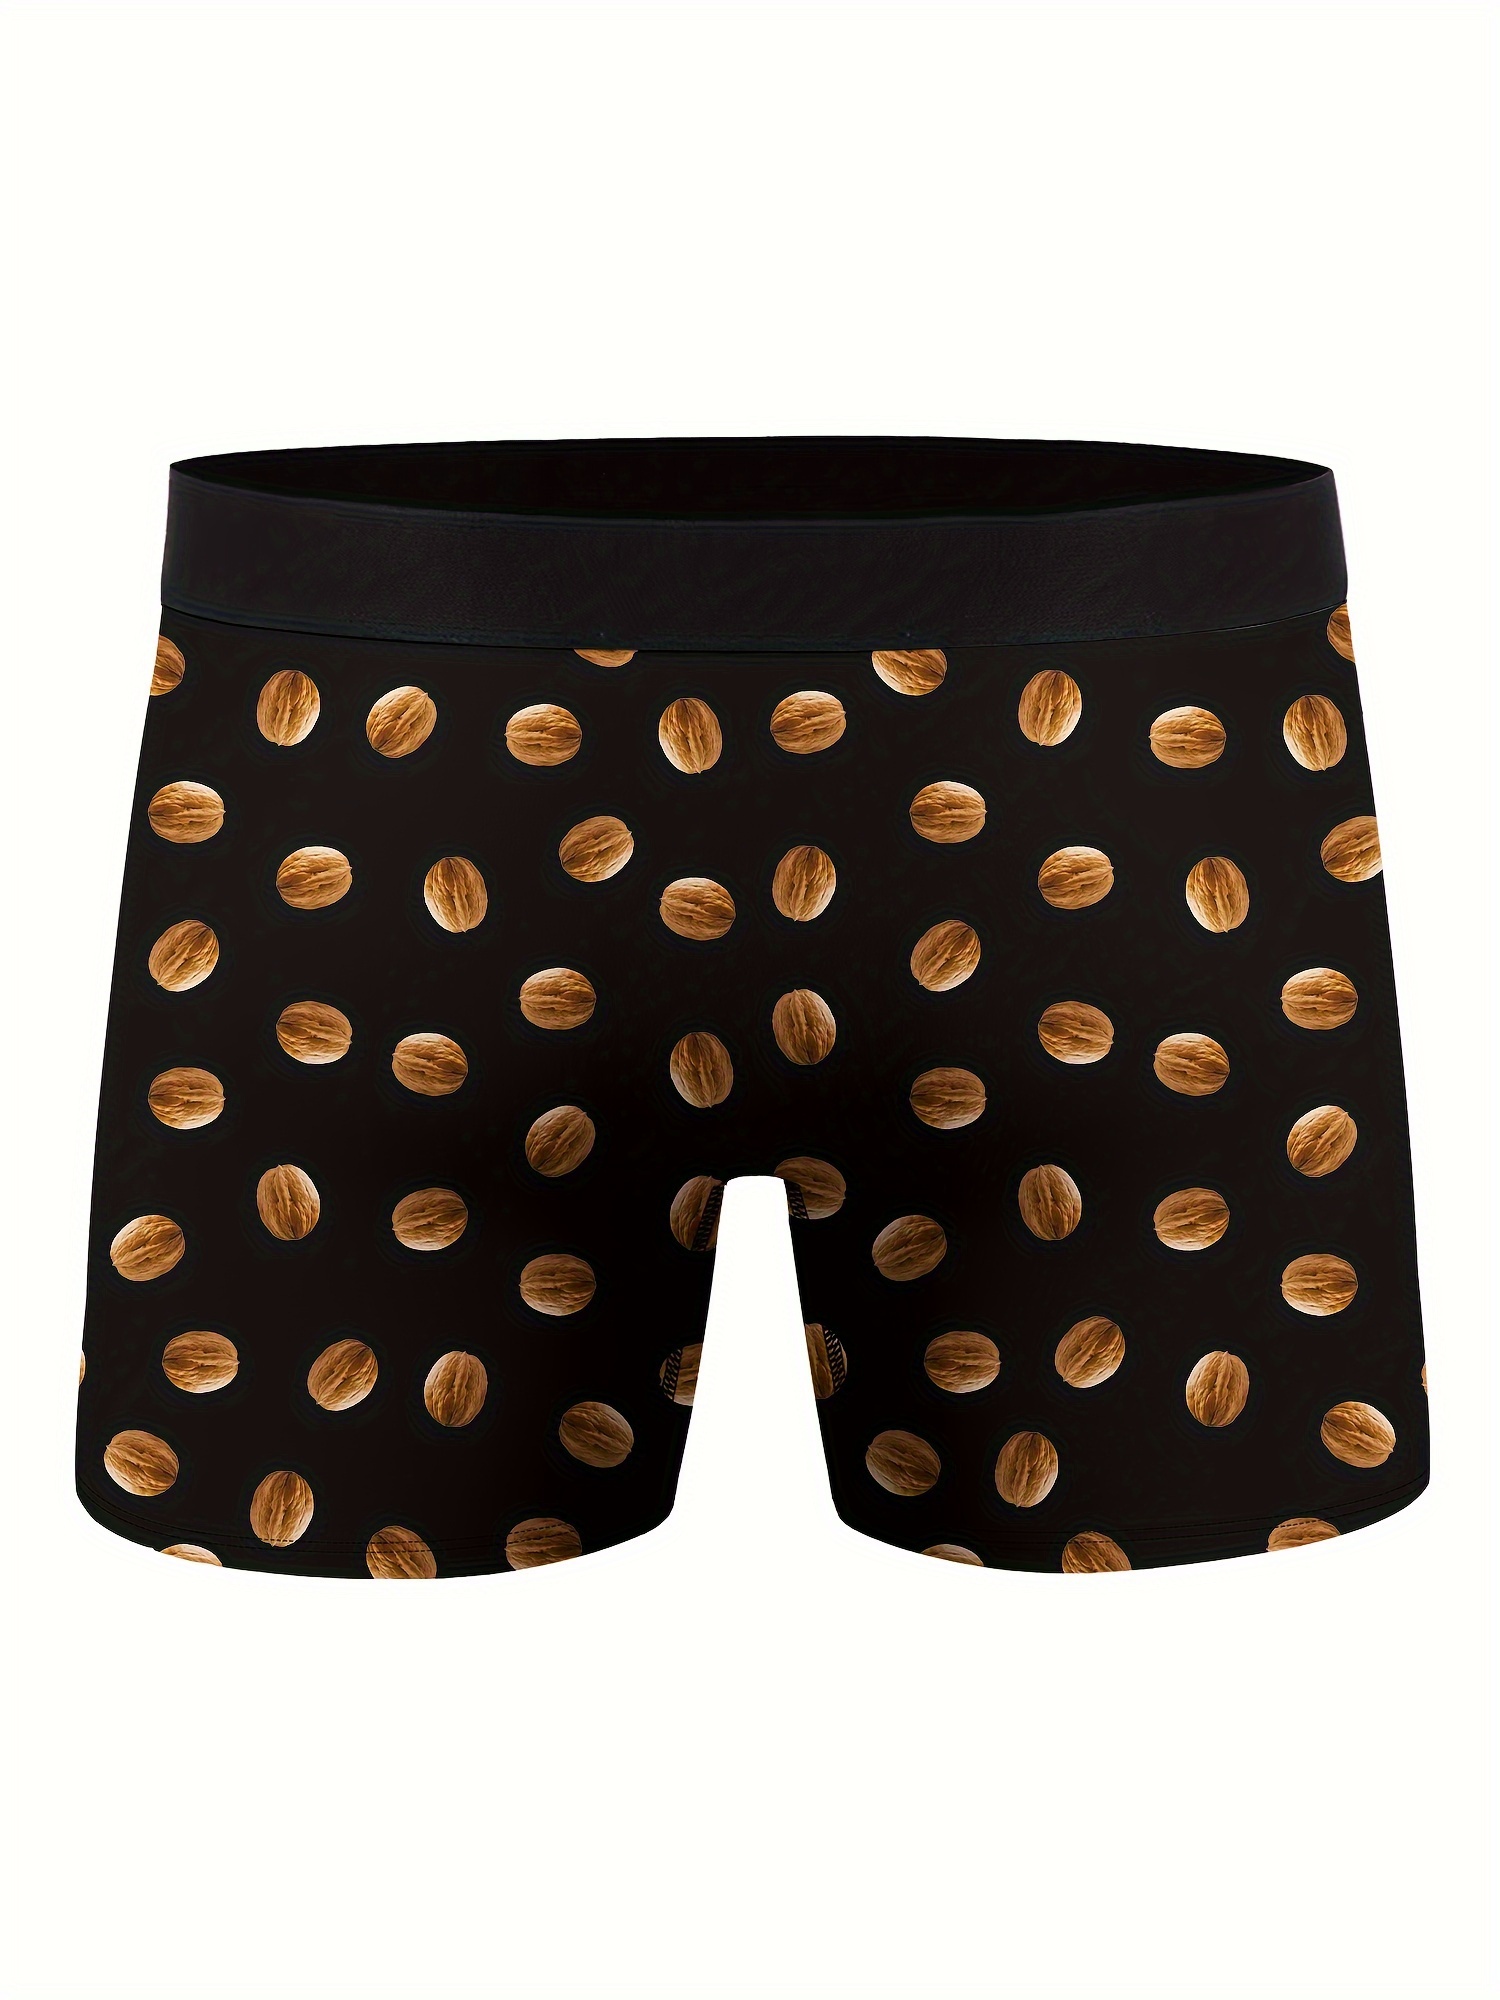 Contain Nuts Print Men's Novelty Funny Underwear Breathable - Temu